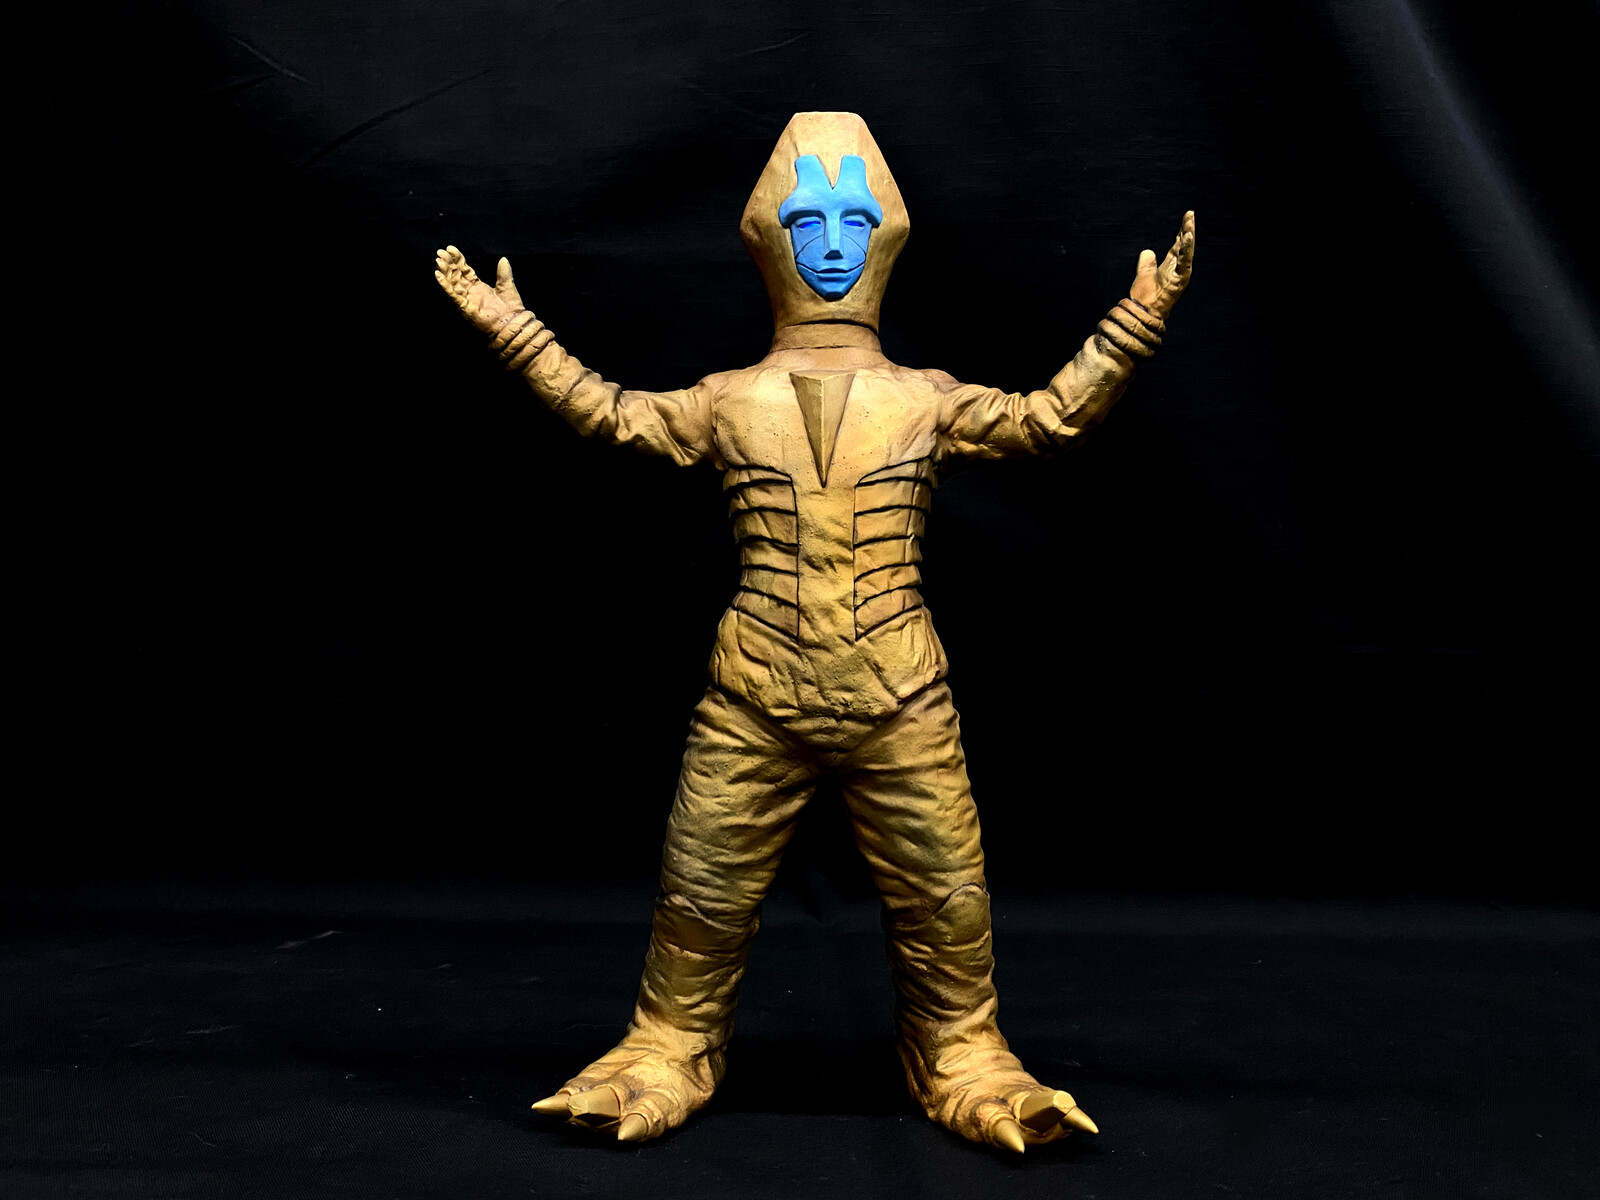 Golden Phantom Gold Satan Art Statue 黄金怪人ゴールドサタン完成品
This piece is hand-painted and finished,
with its own unique quality and detail
that is the trademark of a handcrafted
Art Of Toys custom product.
https://www.solidart.club/